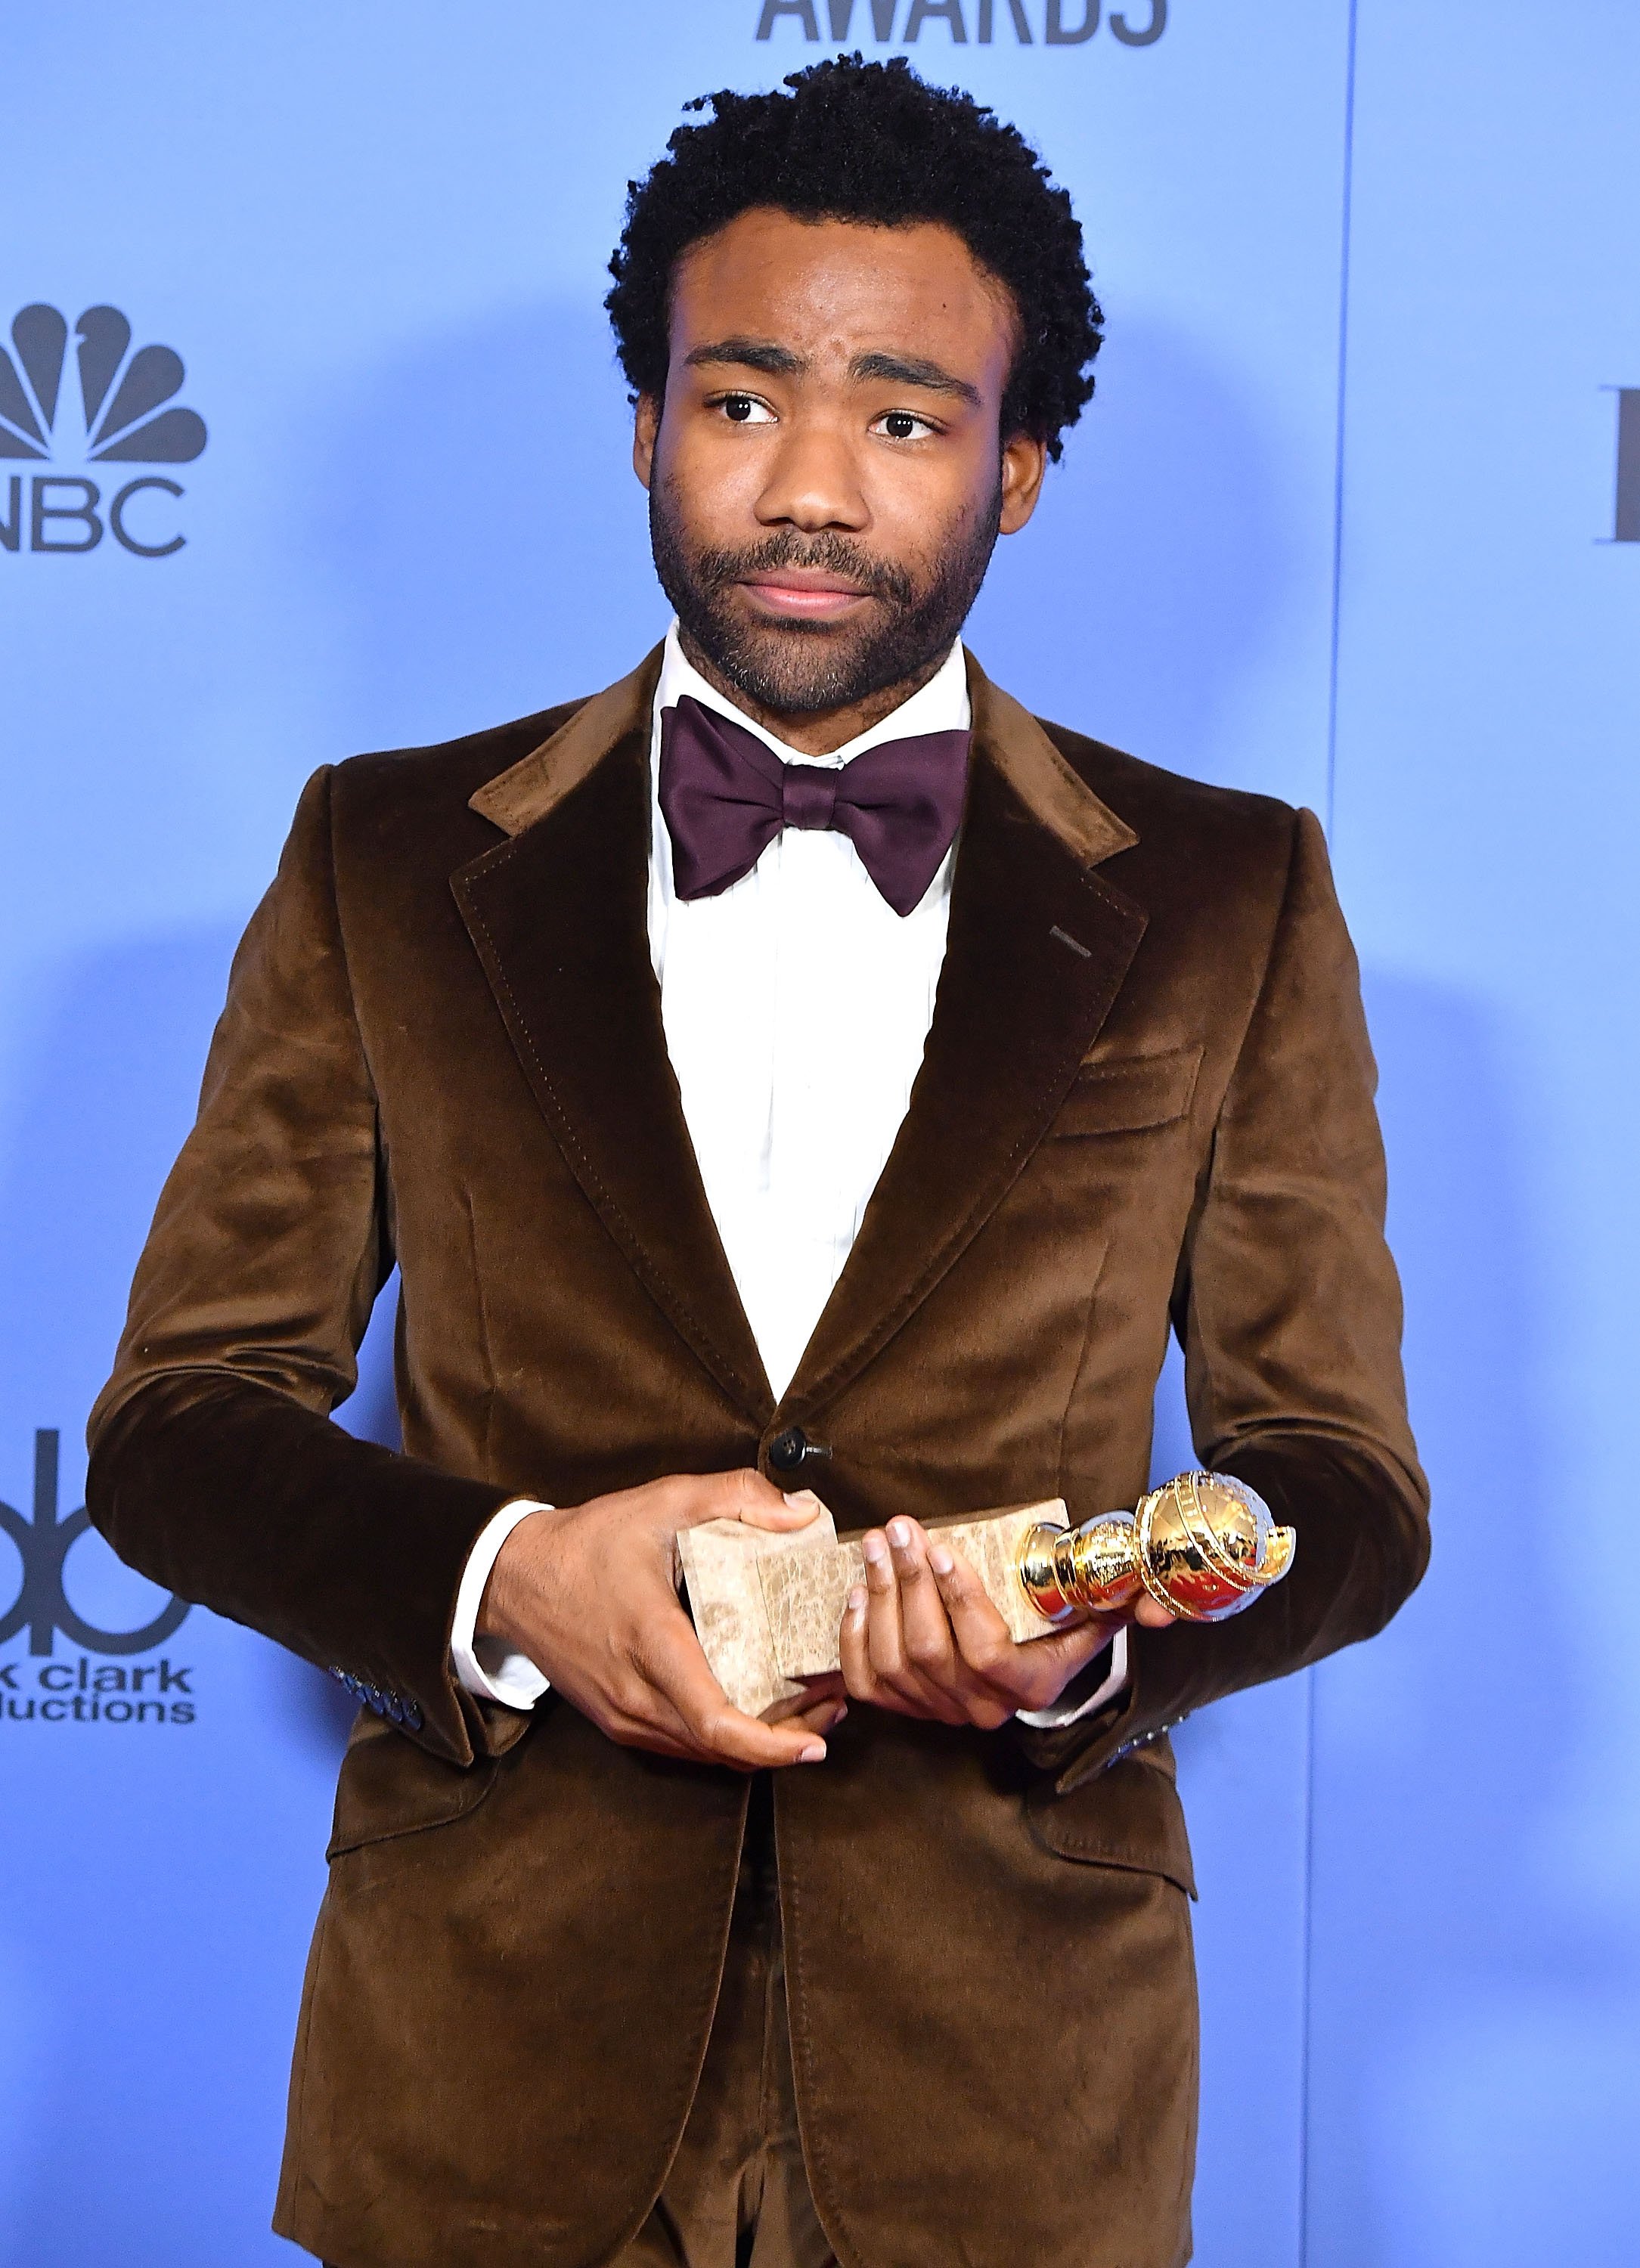 Donald Glover at The Beverly Hilton Hotel on January 8, 2017 in Beverly Hills, California.  Source: Getty Images